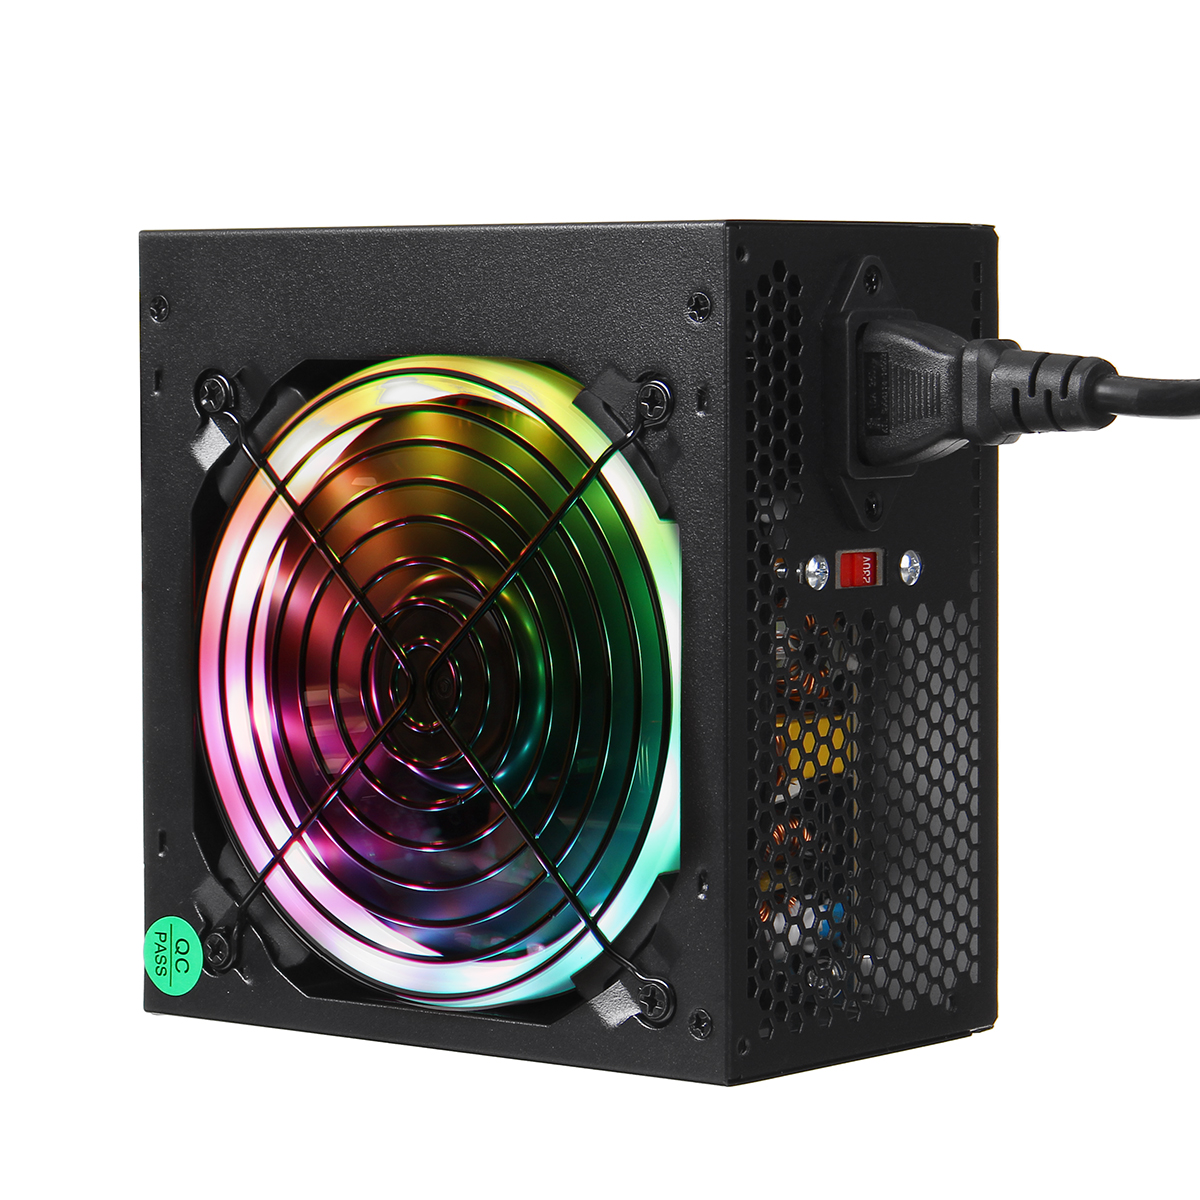 Find 800W PC Power Supply RGB LED 12CM Silent Cooling Fan ATX 12V 24Pin PC Desktop Computer Power Supply PCI SATA for AMD Intel for Sale on Gipsybee.com with cryptocurrencies